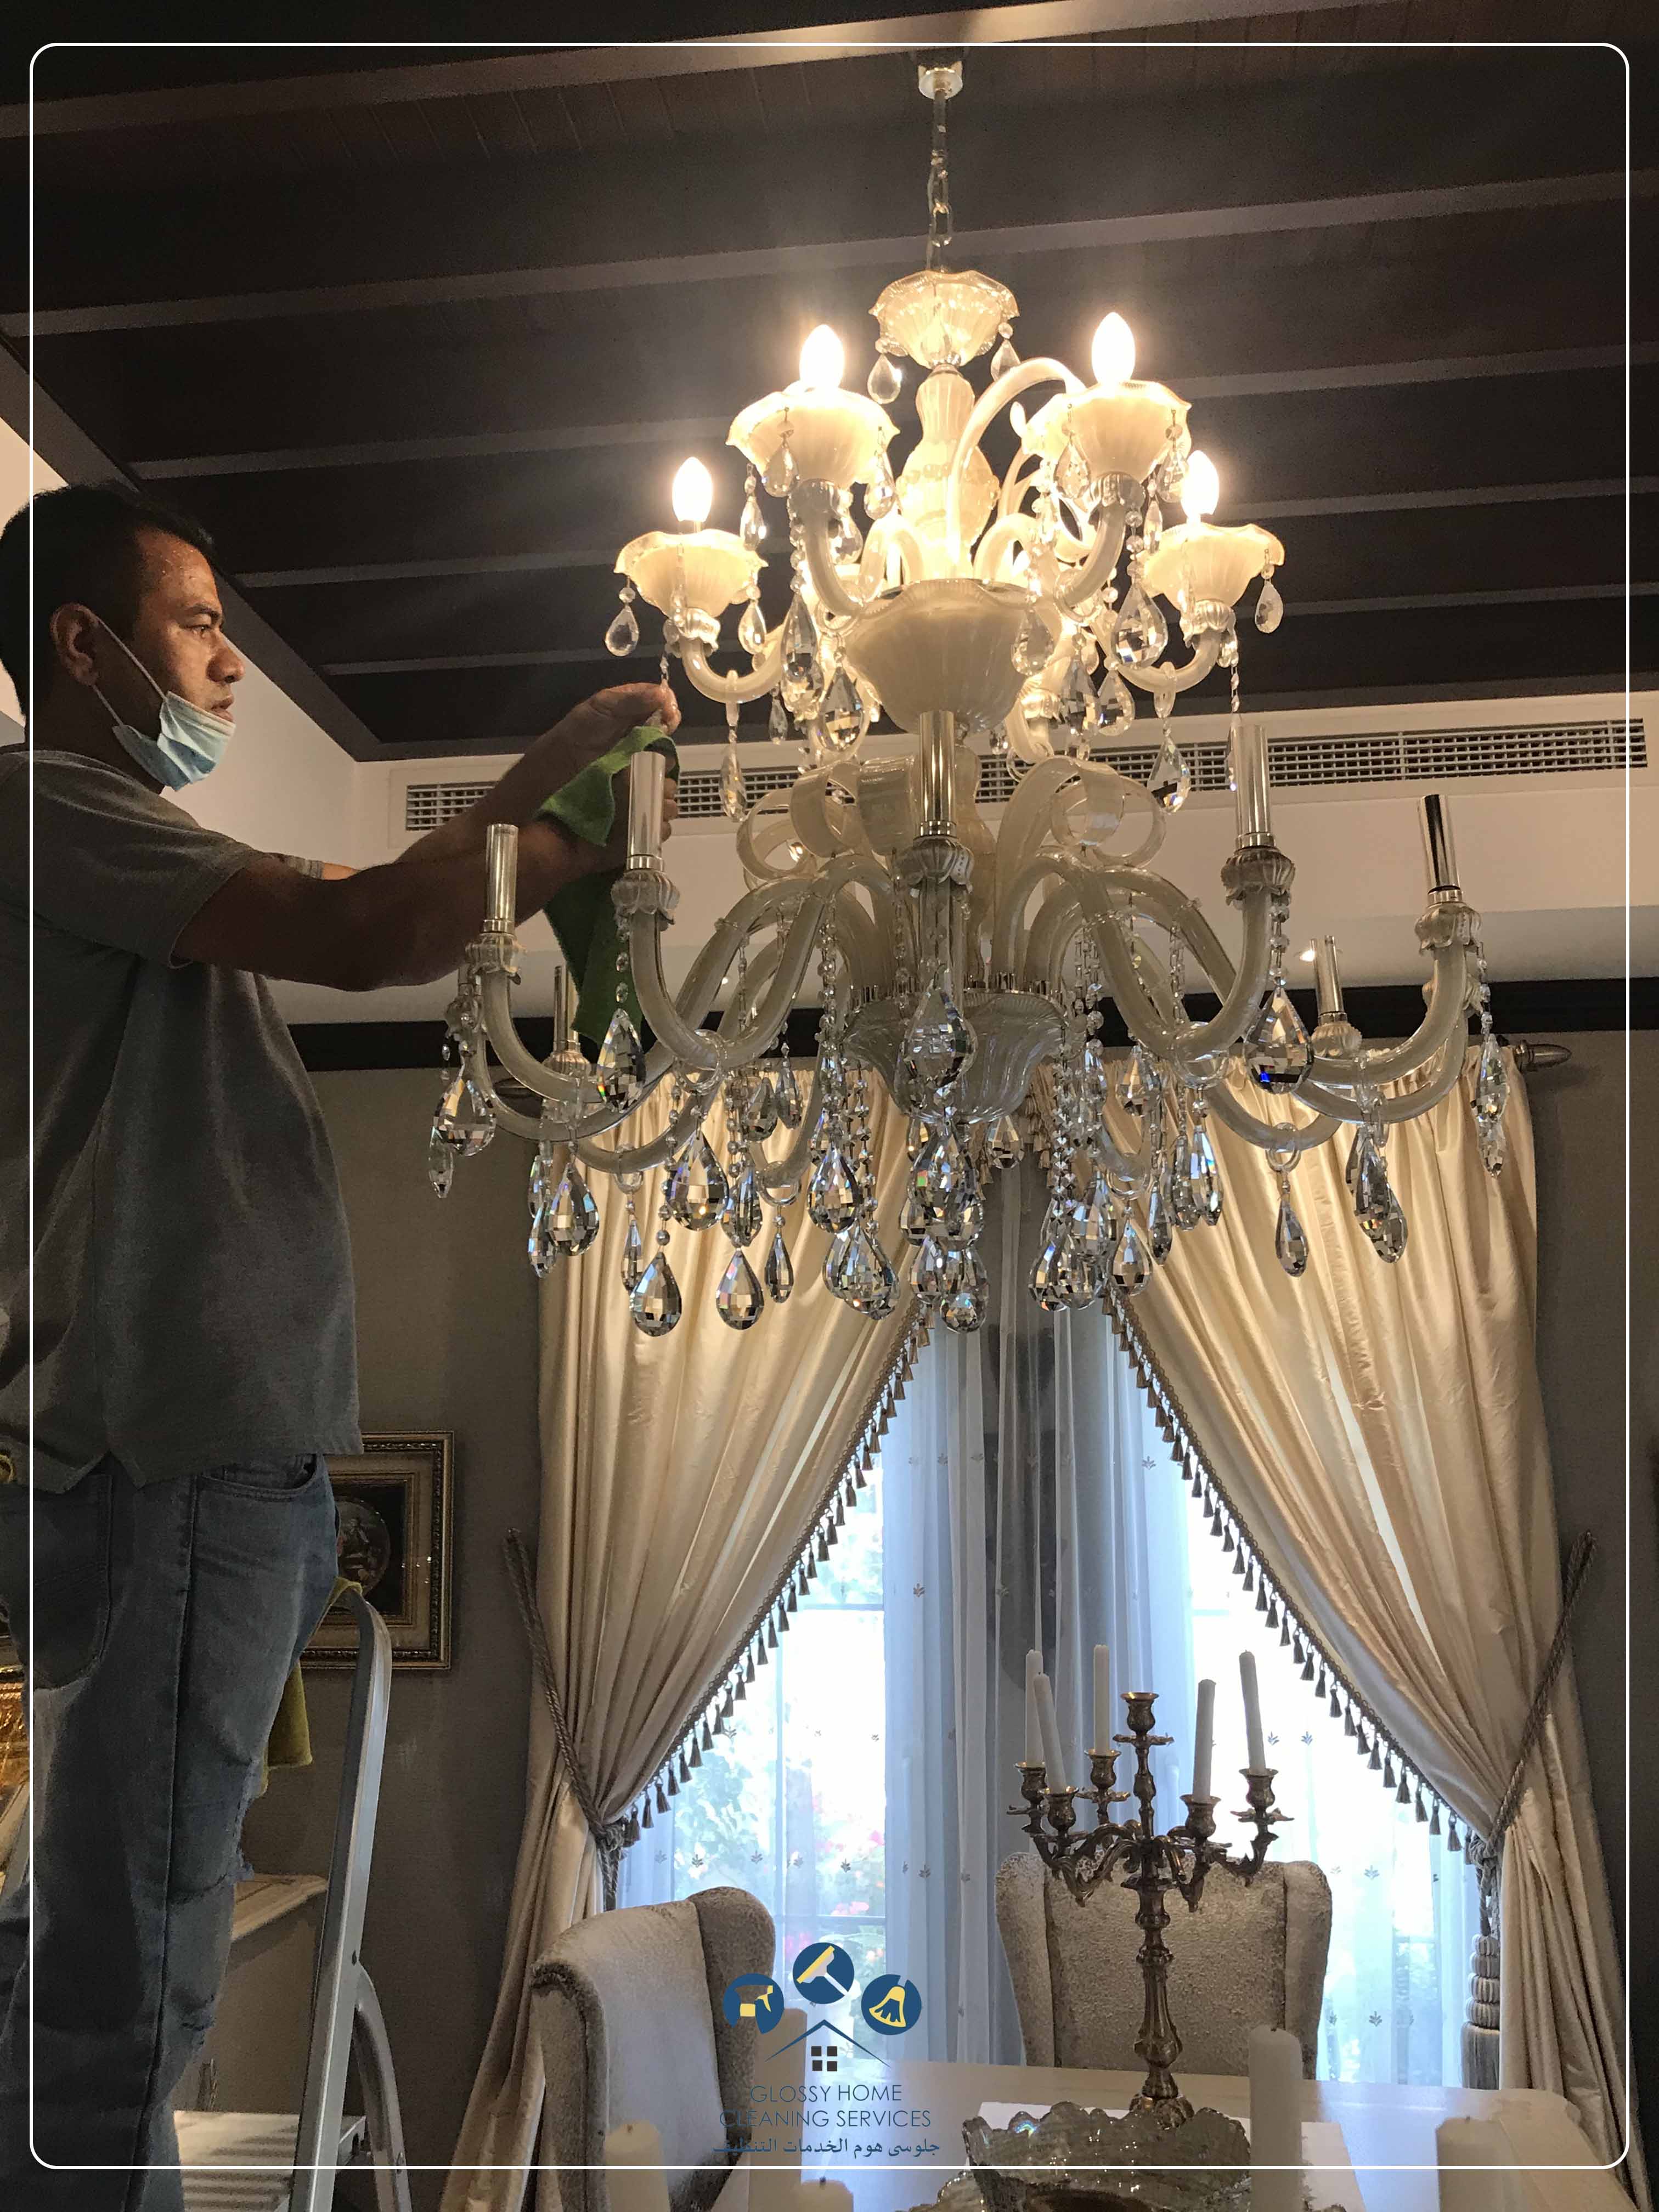 Chandelier cleaning